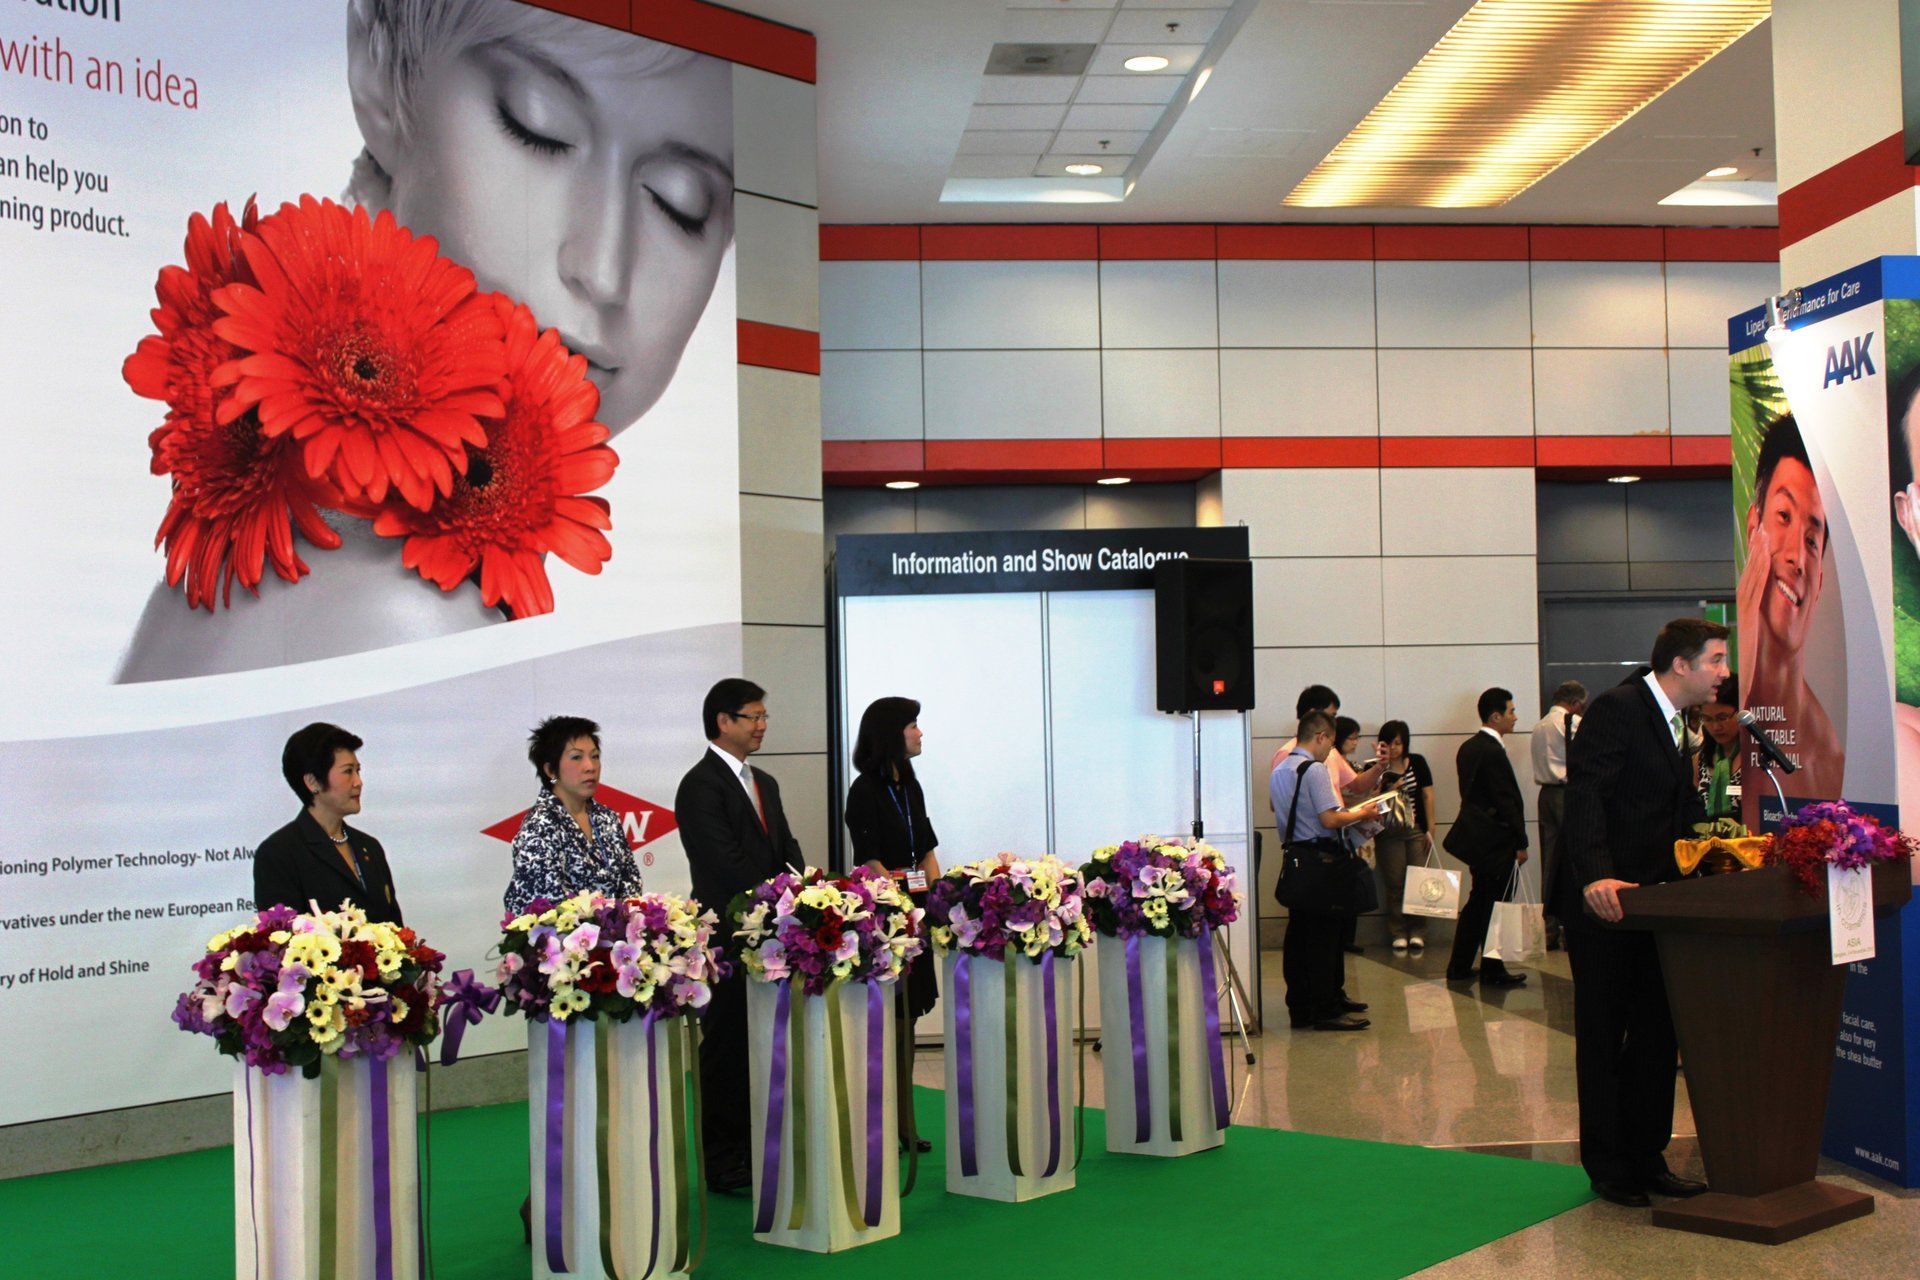 Dow Chemical Product Launch @ Thailand 2016. Booth designed and built by Essential Global Fairs.